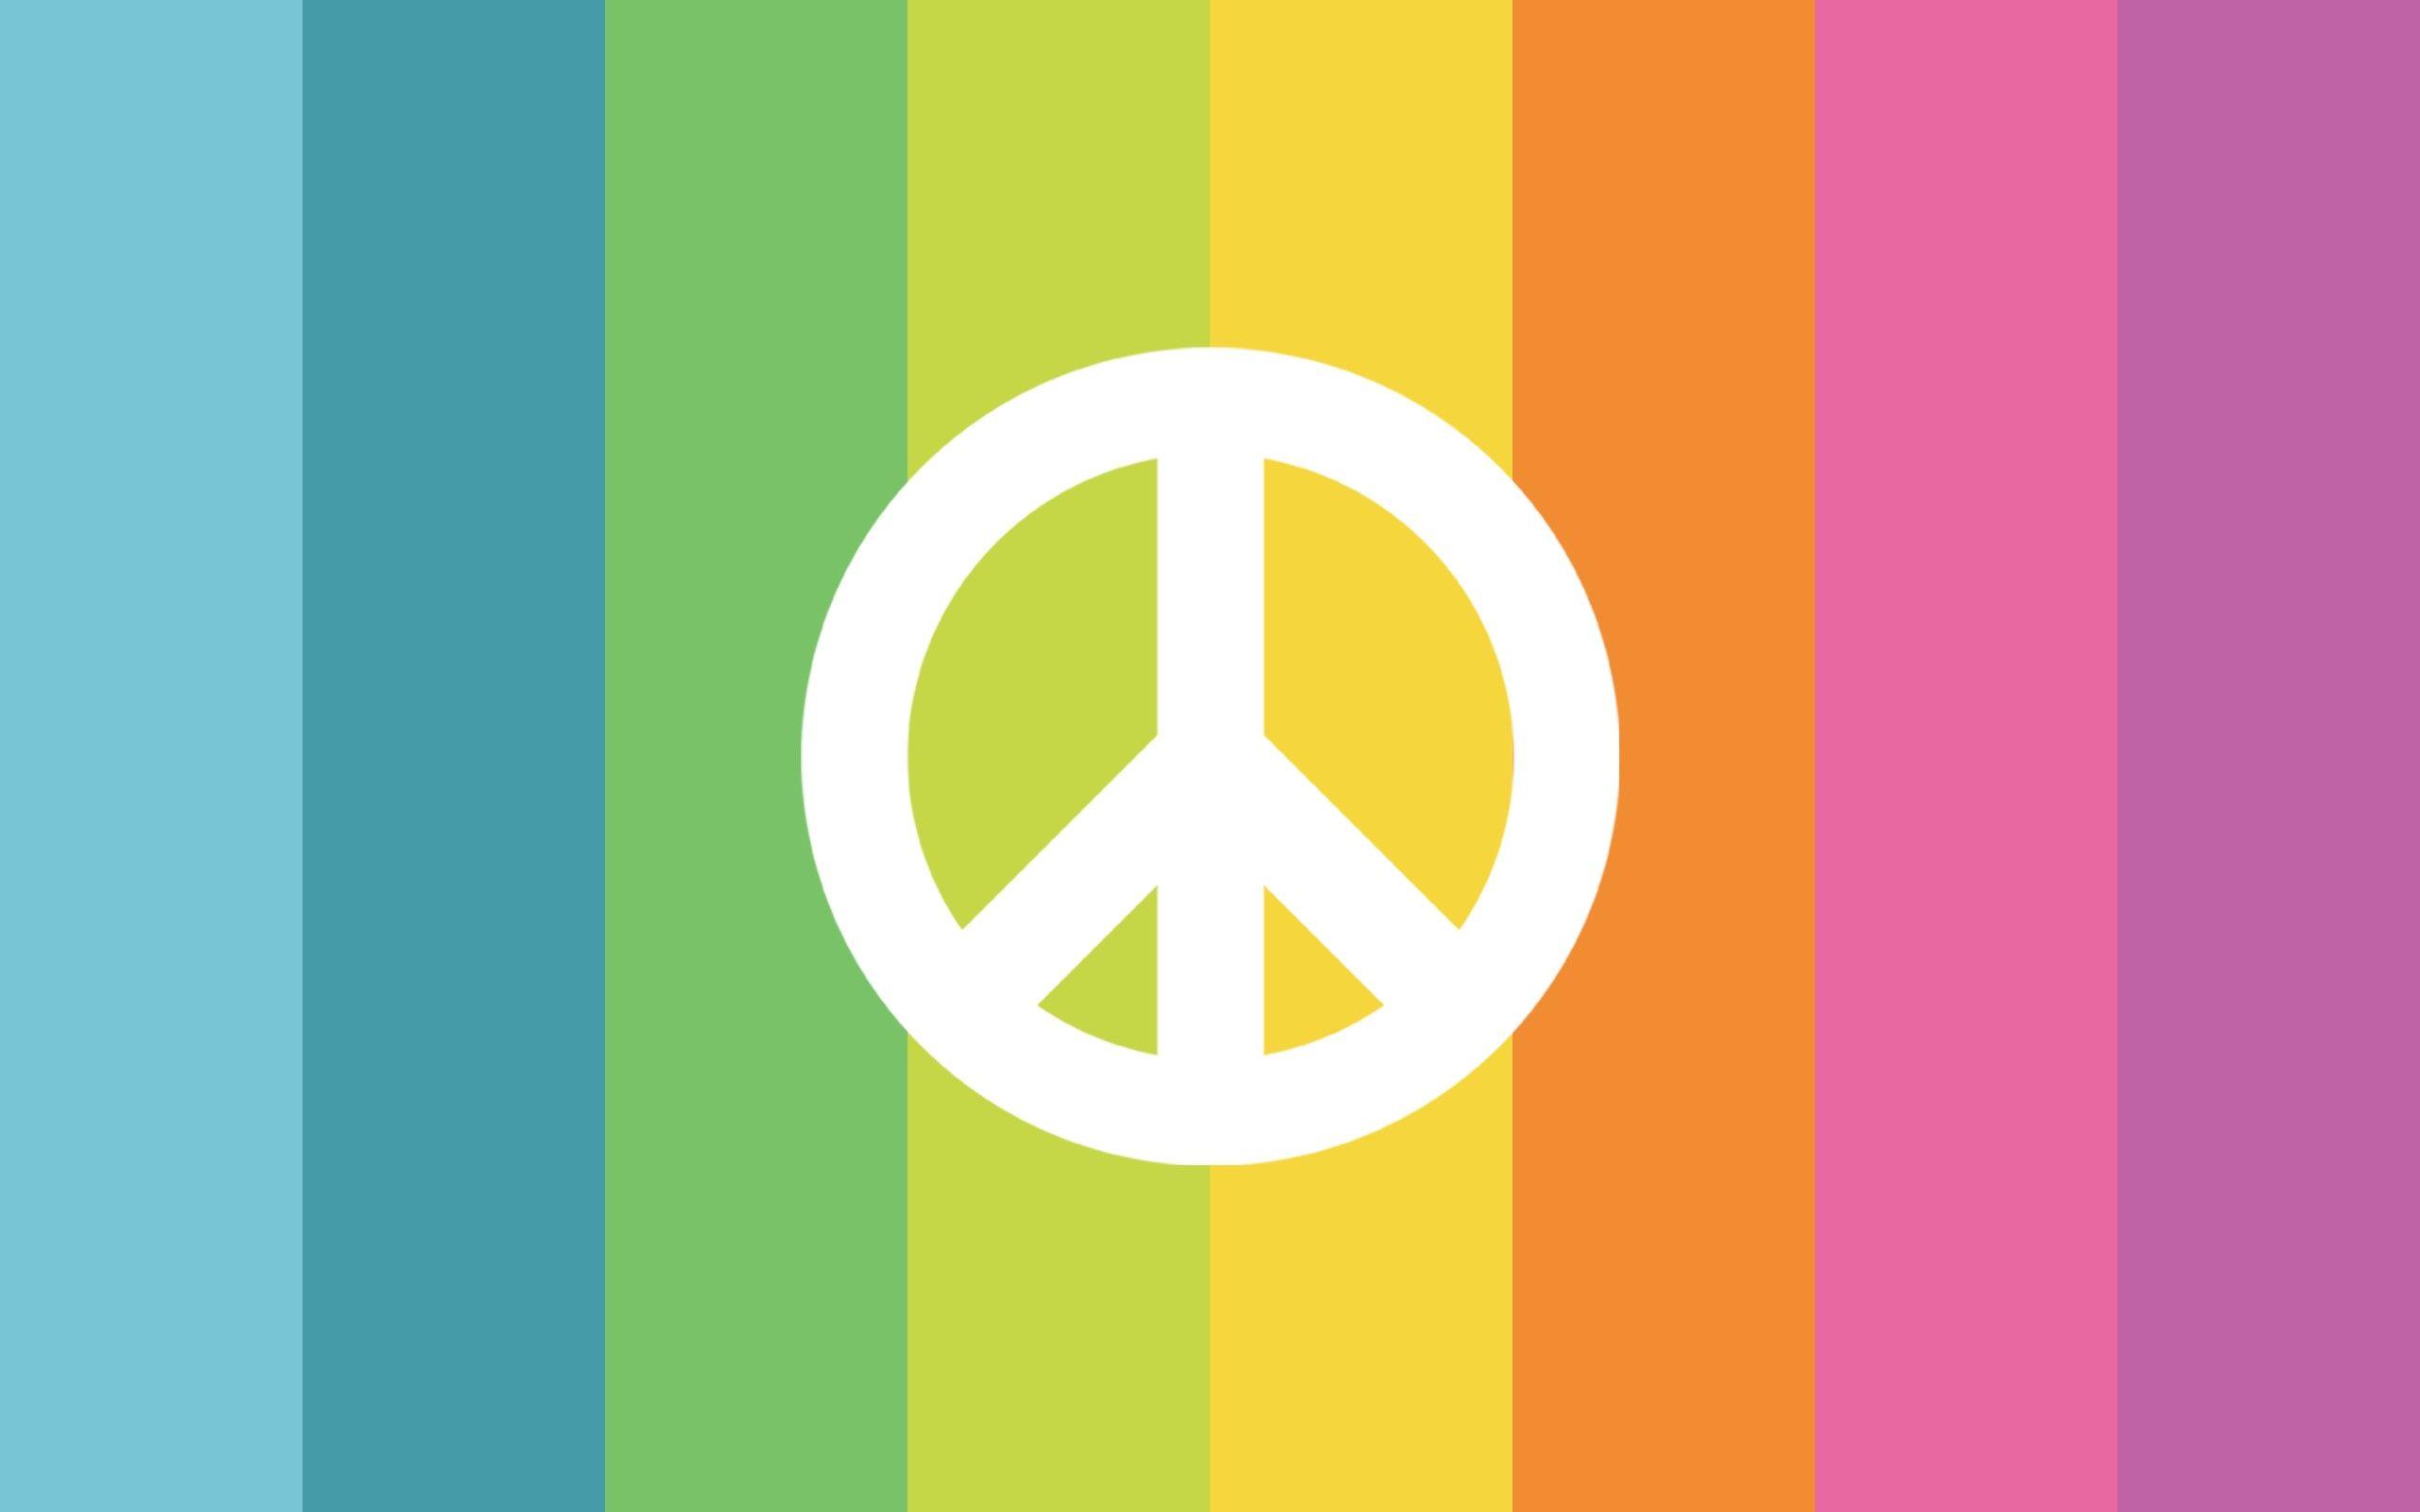 Peace wallpaperDownload free amazing full HD background